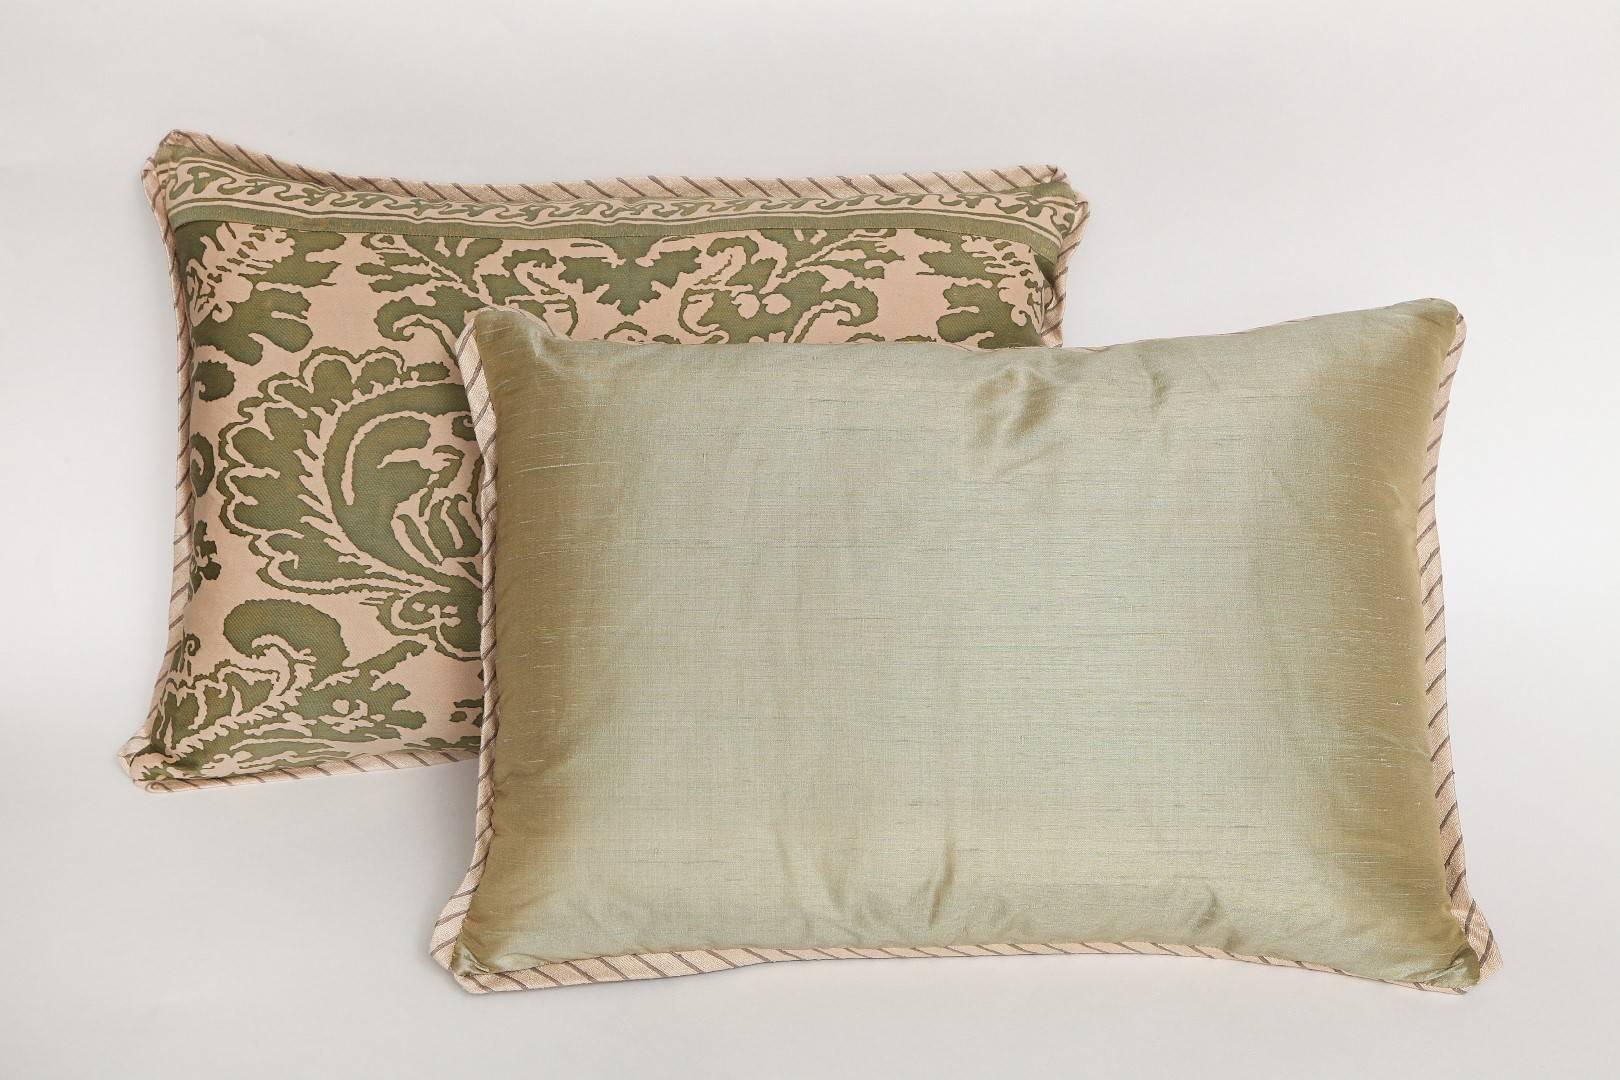 Contemporary A Pair of Fortuny Fabric Cushions in the Sevigne Pattern